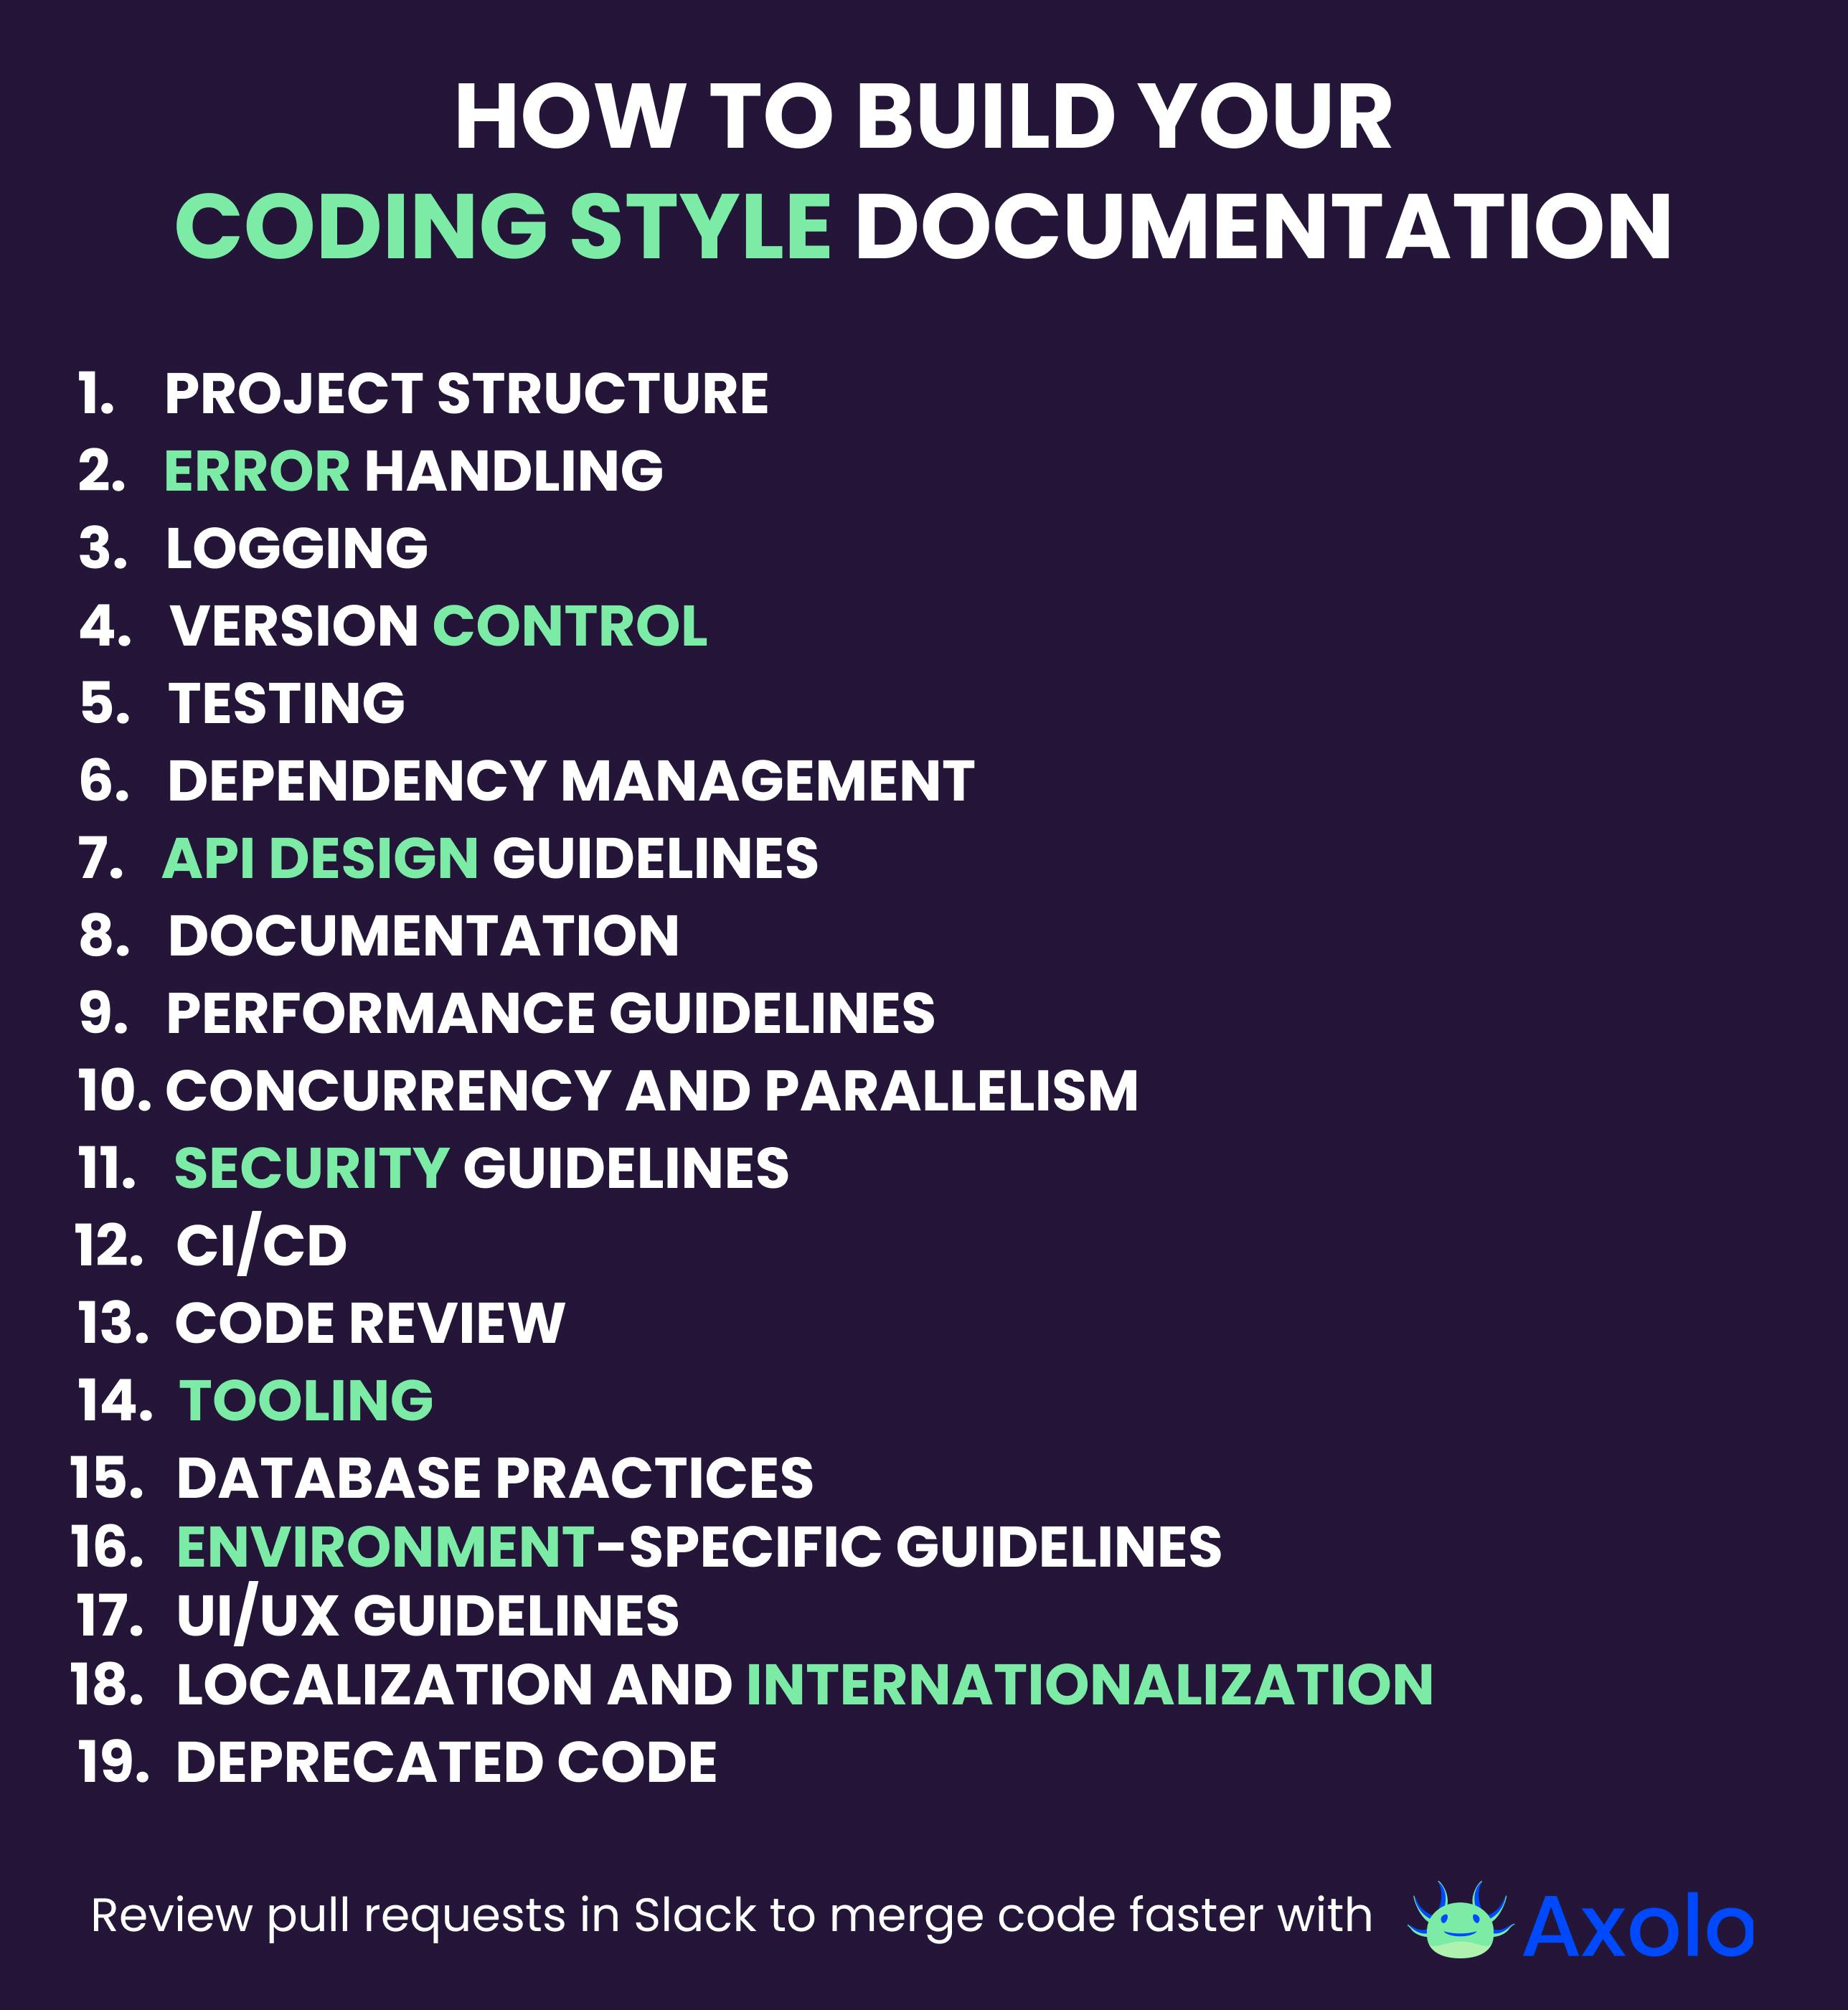 How to build your coding style documentation